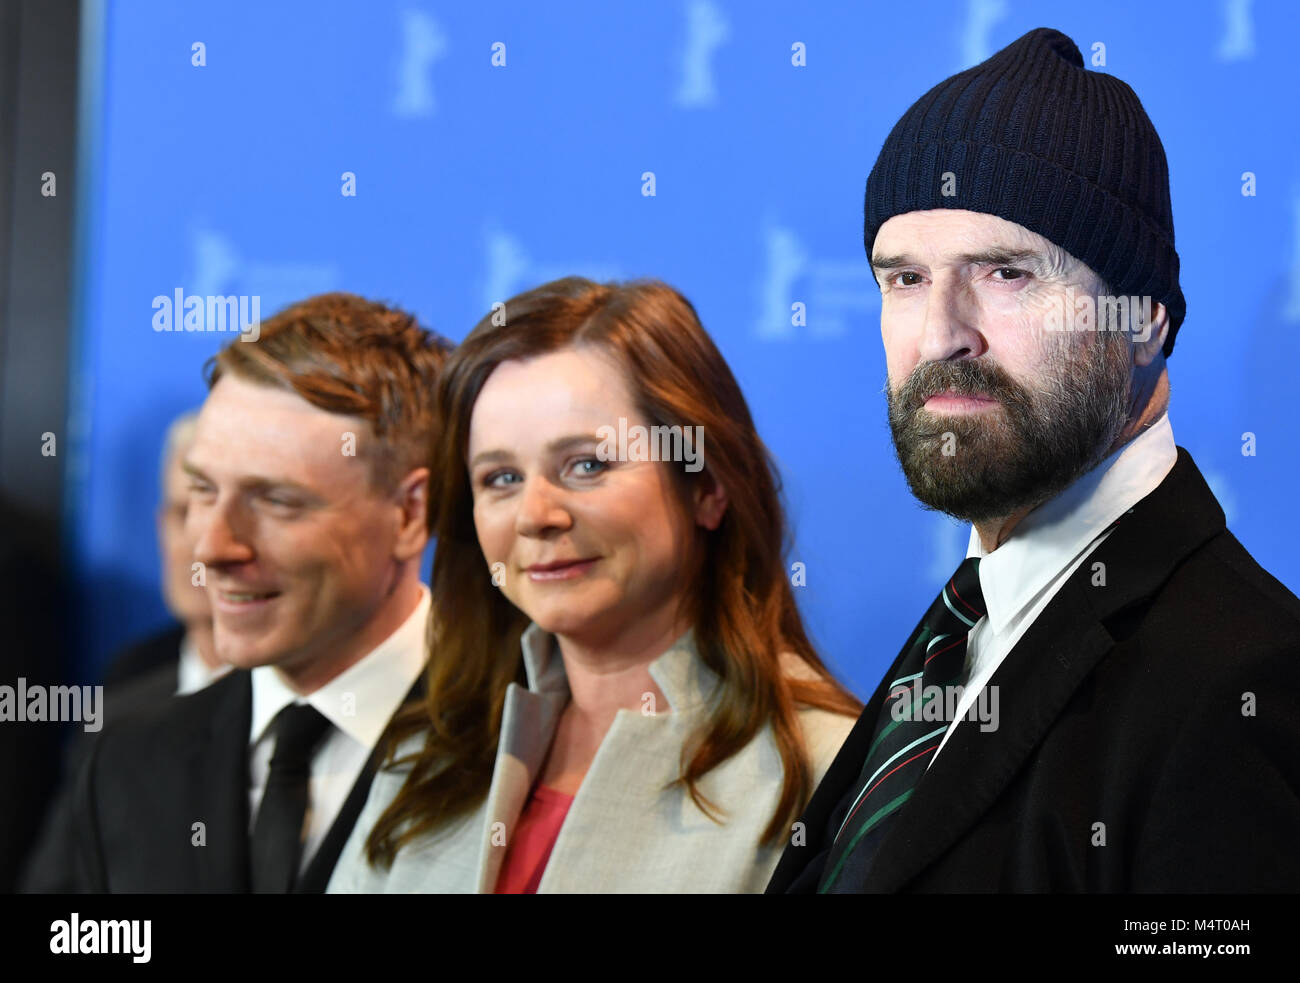 Berlin, Germany. 17th Feb, 2018. Actor Edwin Thomas, actress Emily Watson with Rupert Everett, director, actor, screenwriter, during the photocall of the film 'The Happy Prince' at the Berlinale 2018 Film Festival in Berlin, Germany, 17 February 2018. The film runs in the 'Berlinale Special Gala' section of the 68th International Berlin Film Festival. Credit: Jens Kalaene/dpa/Alamy Live News Stock Photo